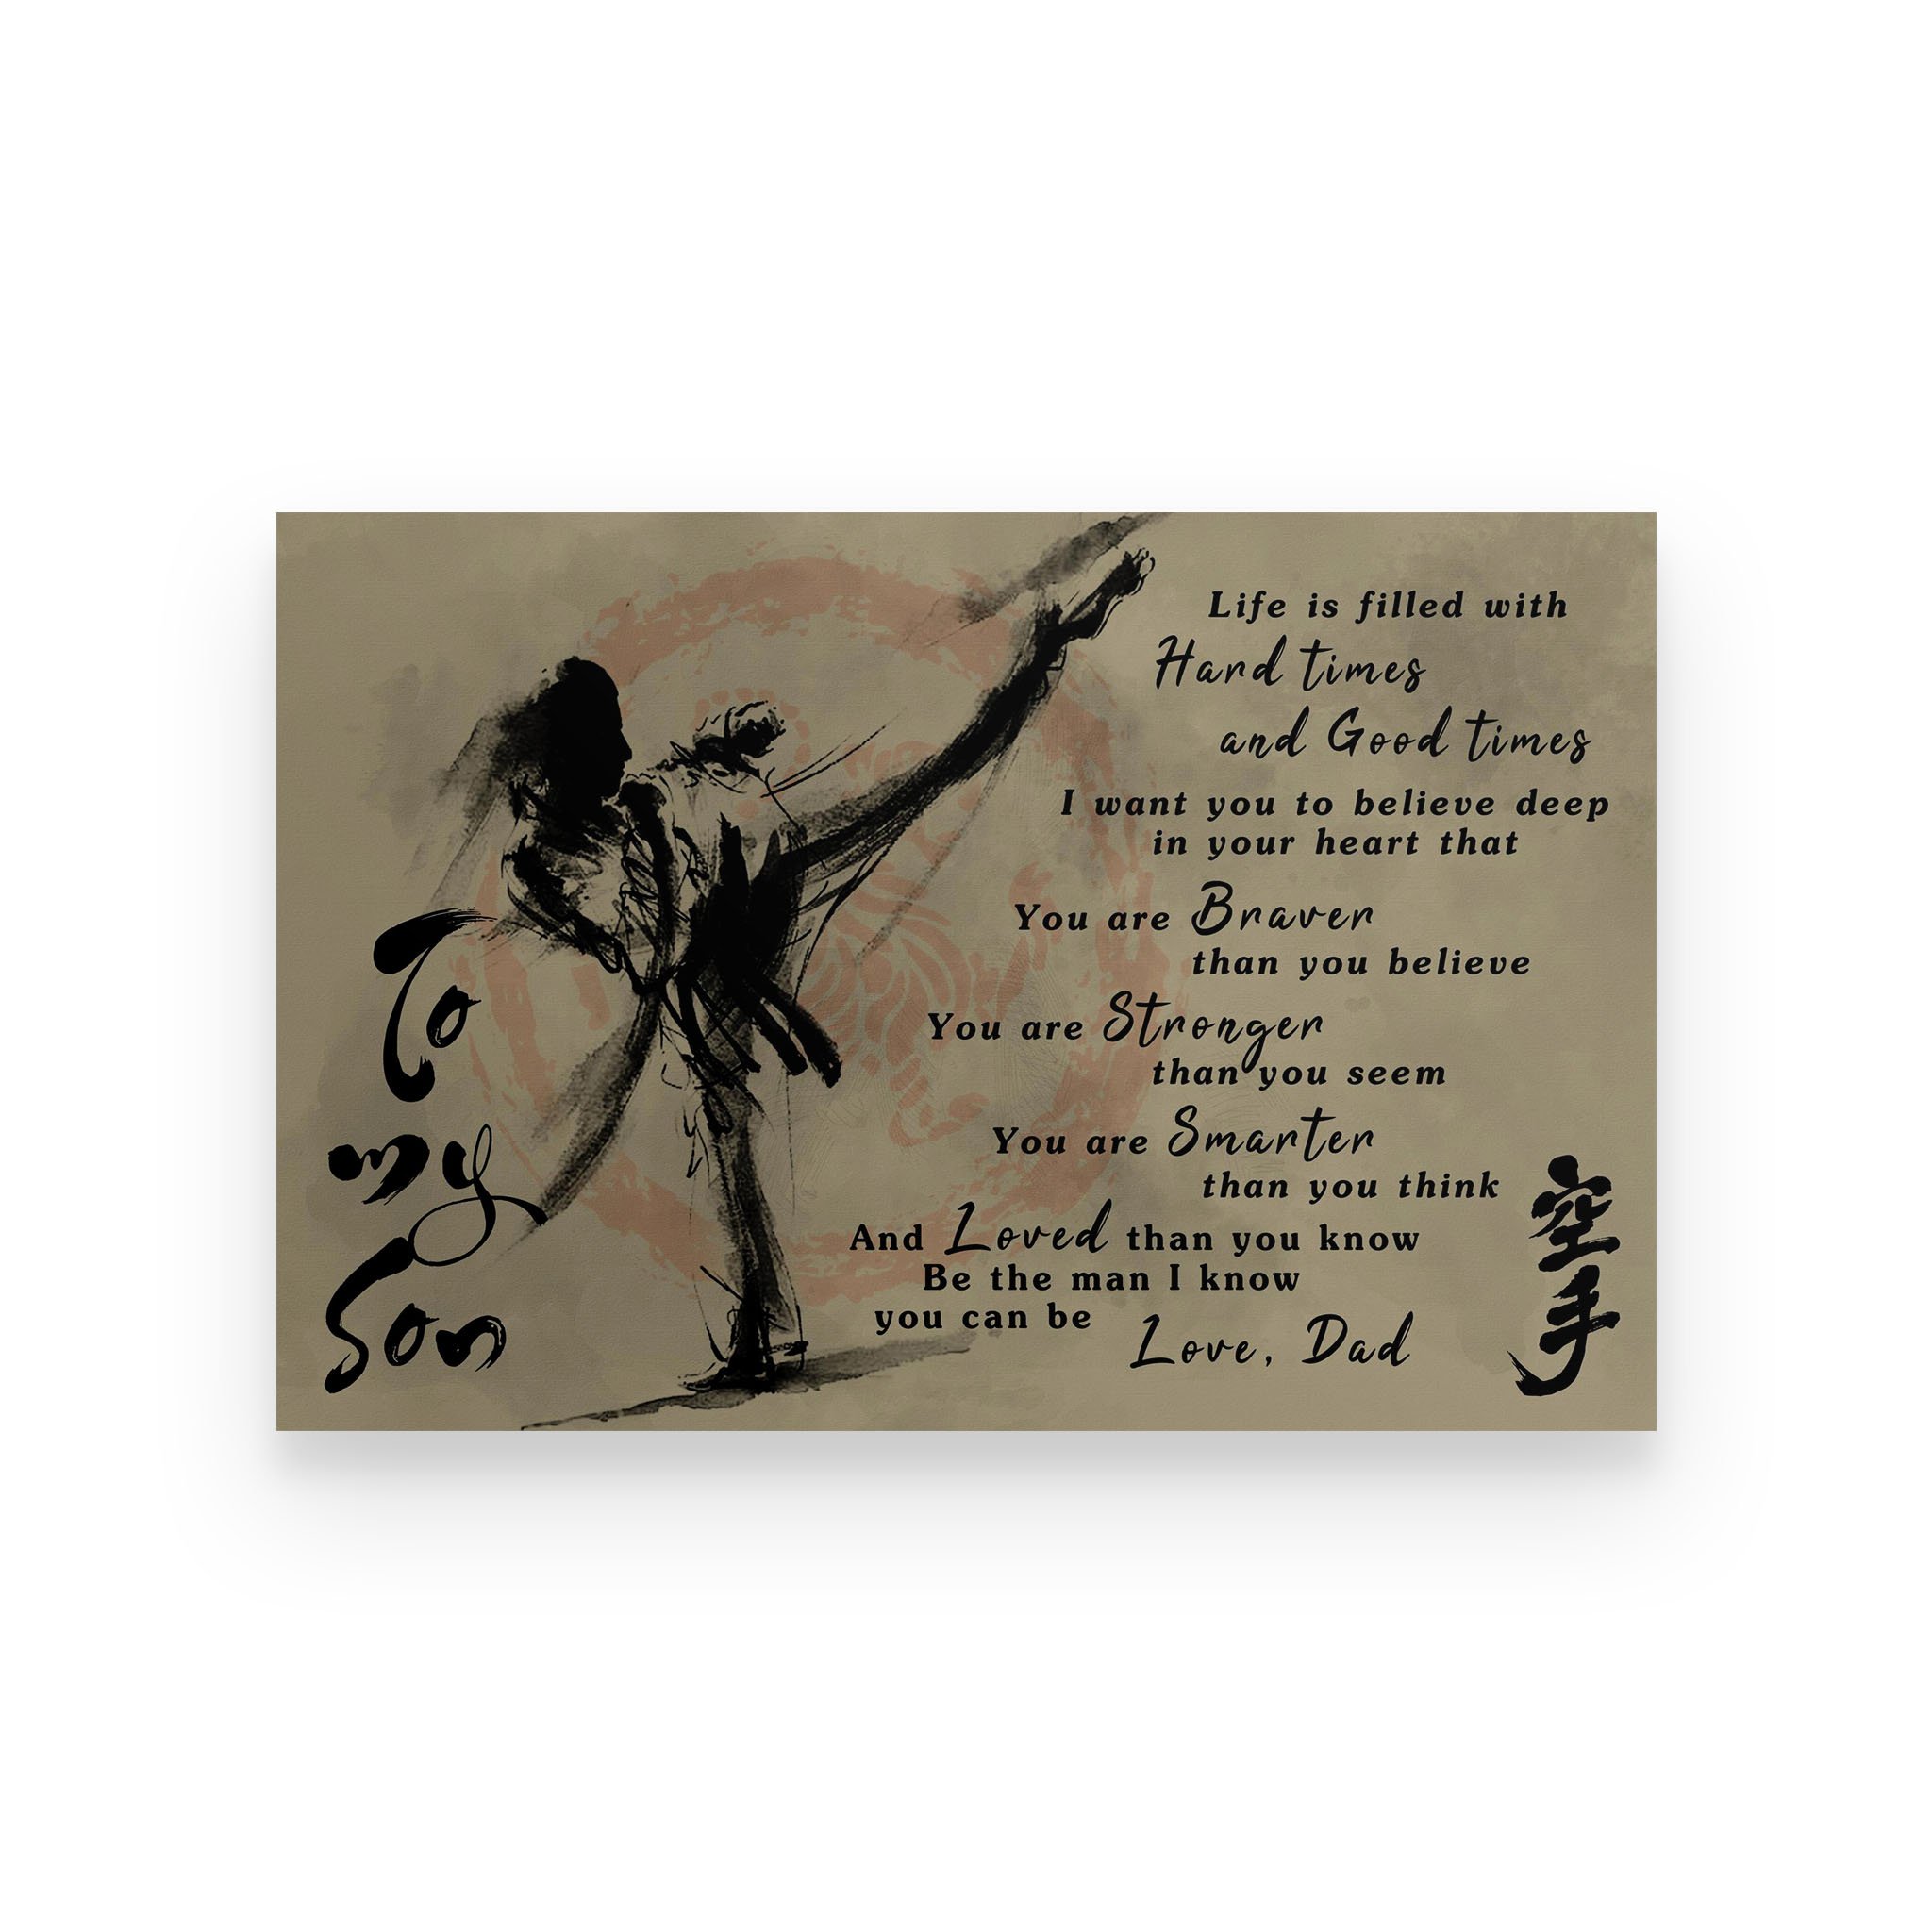 Aikido poster dad to son life is filled with hard times and good times